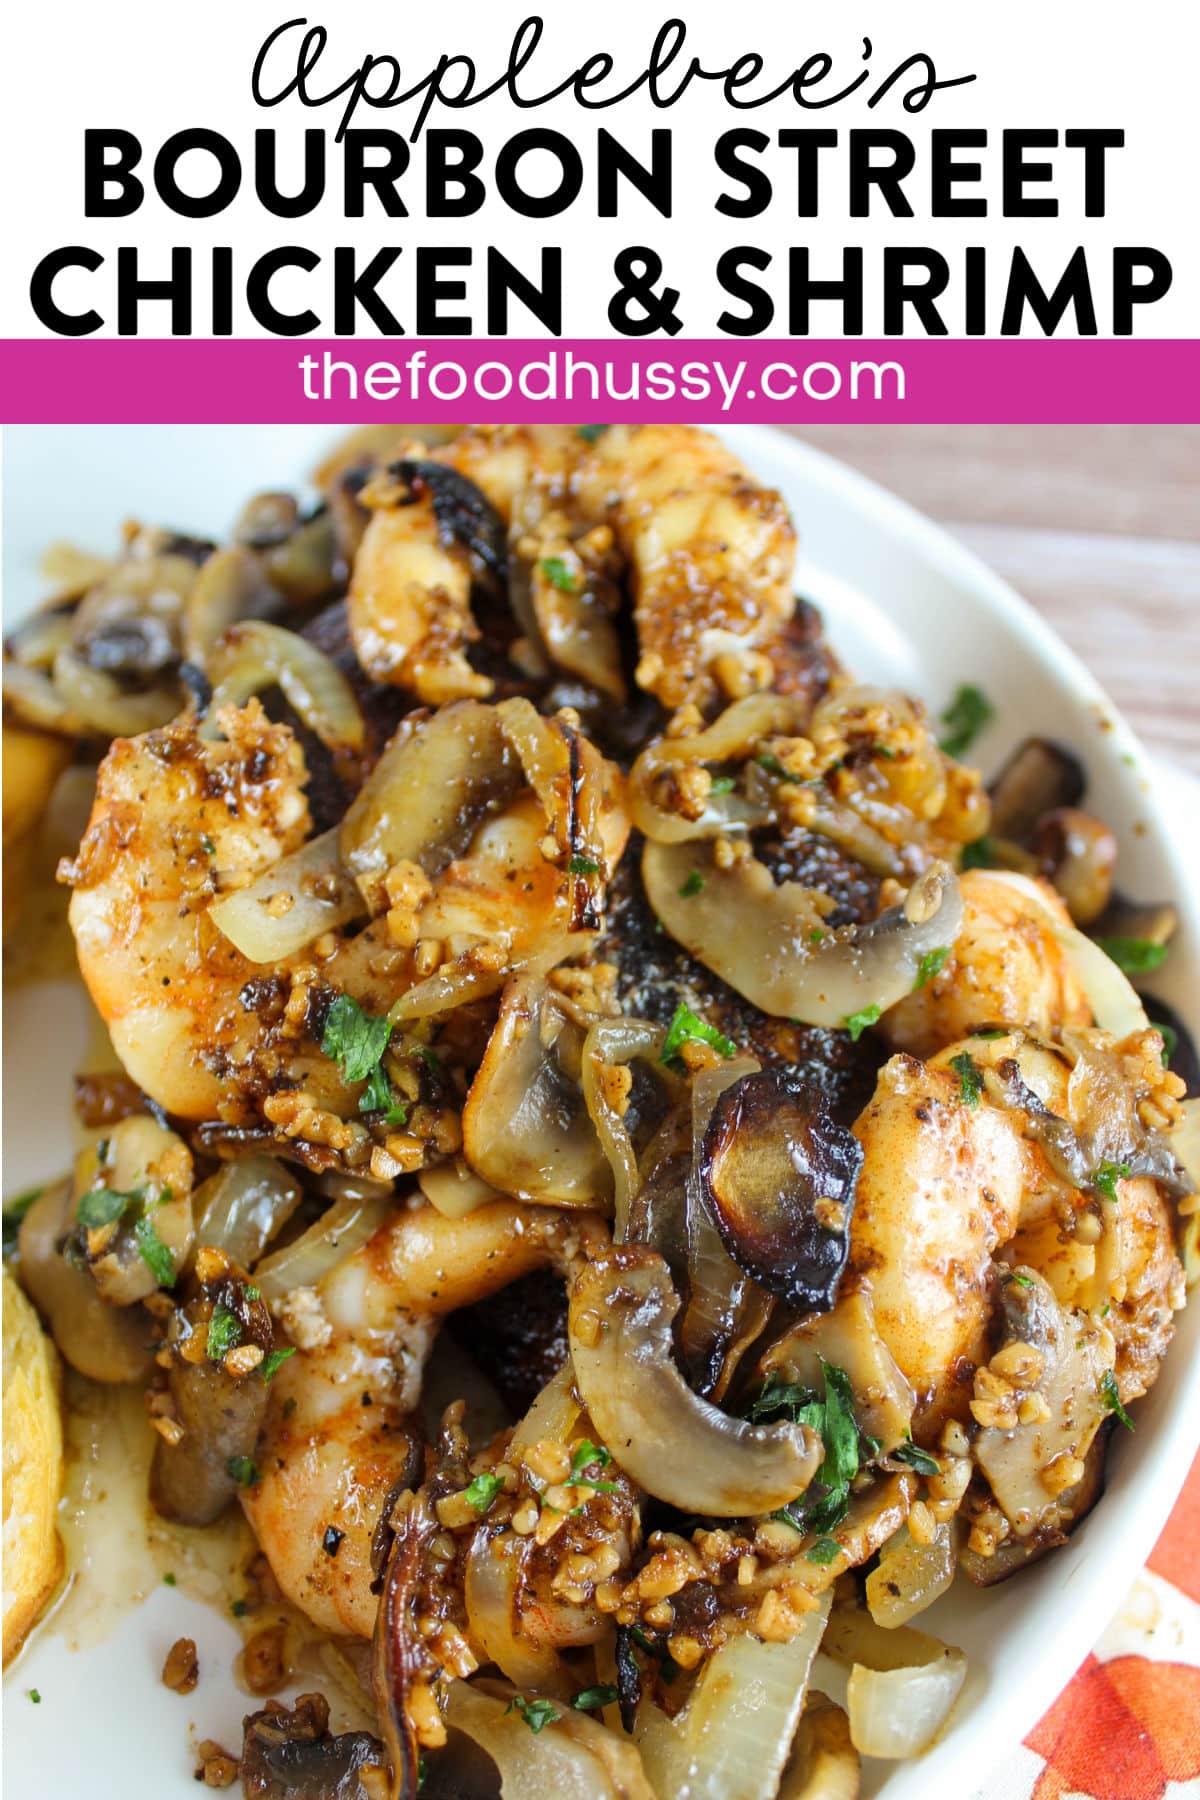 Applebees Bourbon Street Chicken and Shrimp is a sizzling Cajun delight! Cajun-seasoned chicken and shrimp smothered and covered with buttery garlic mushrooms and onions. Serve it like they do with a side of mashed red potatoes! via @foodhussy